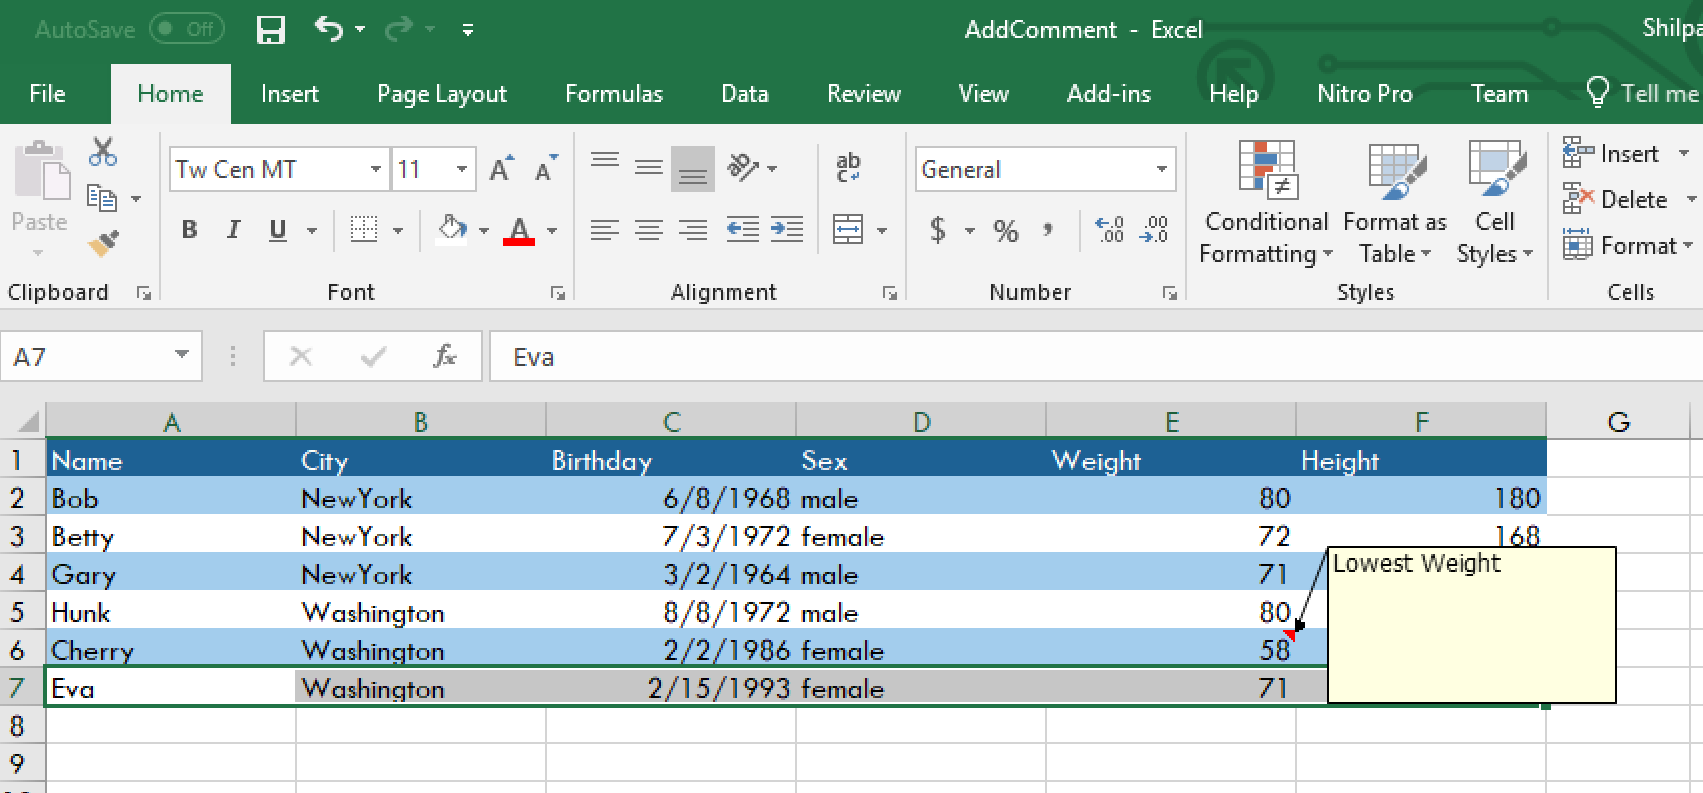 Add comments to your spreadsheets